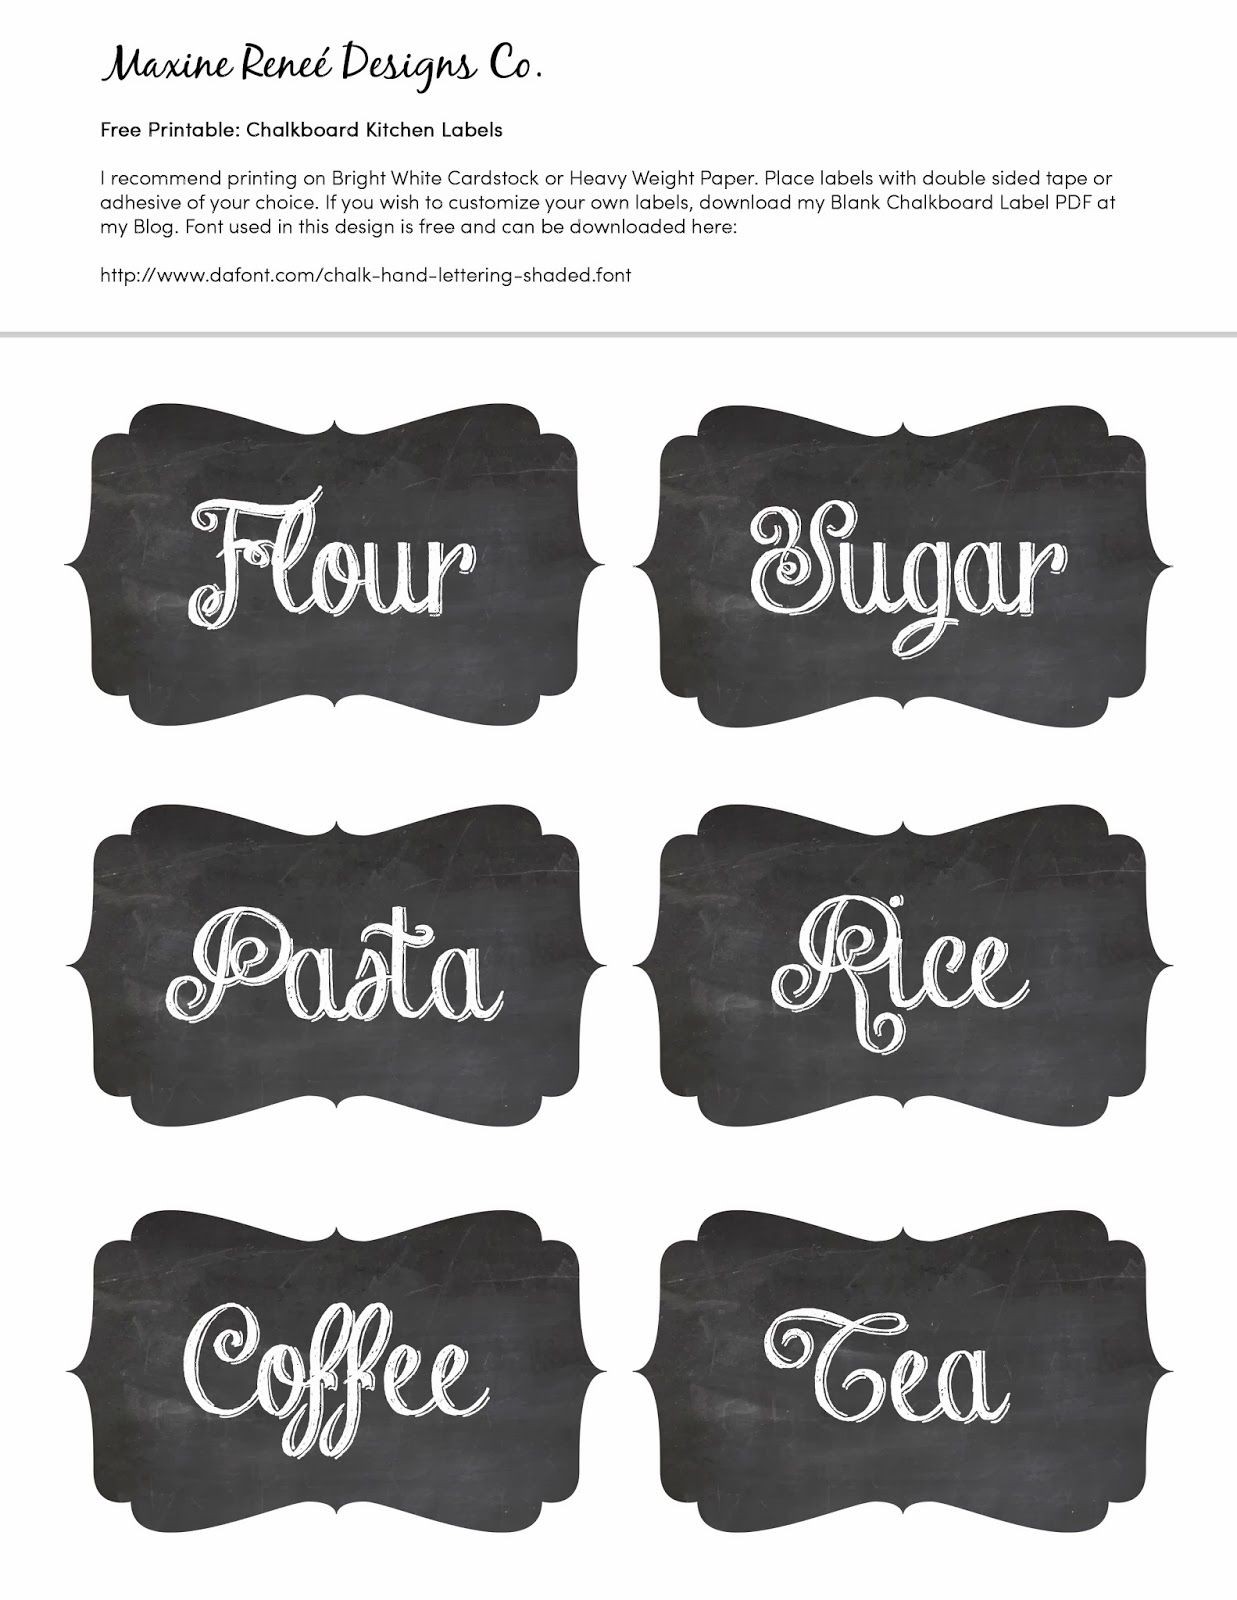 Free Printables Chalkboard Labels Maybe For Auction Paddles You Printable